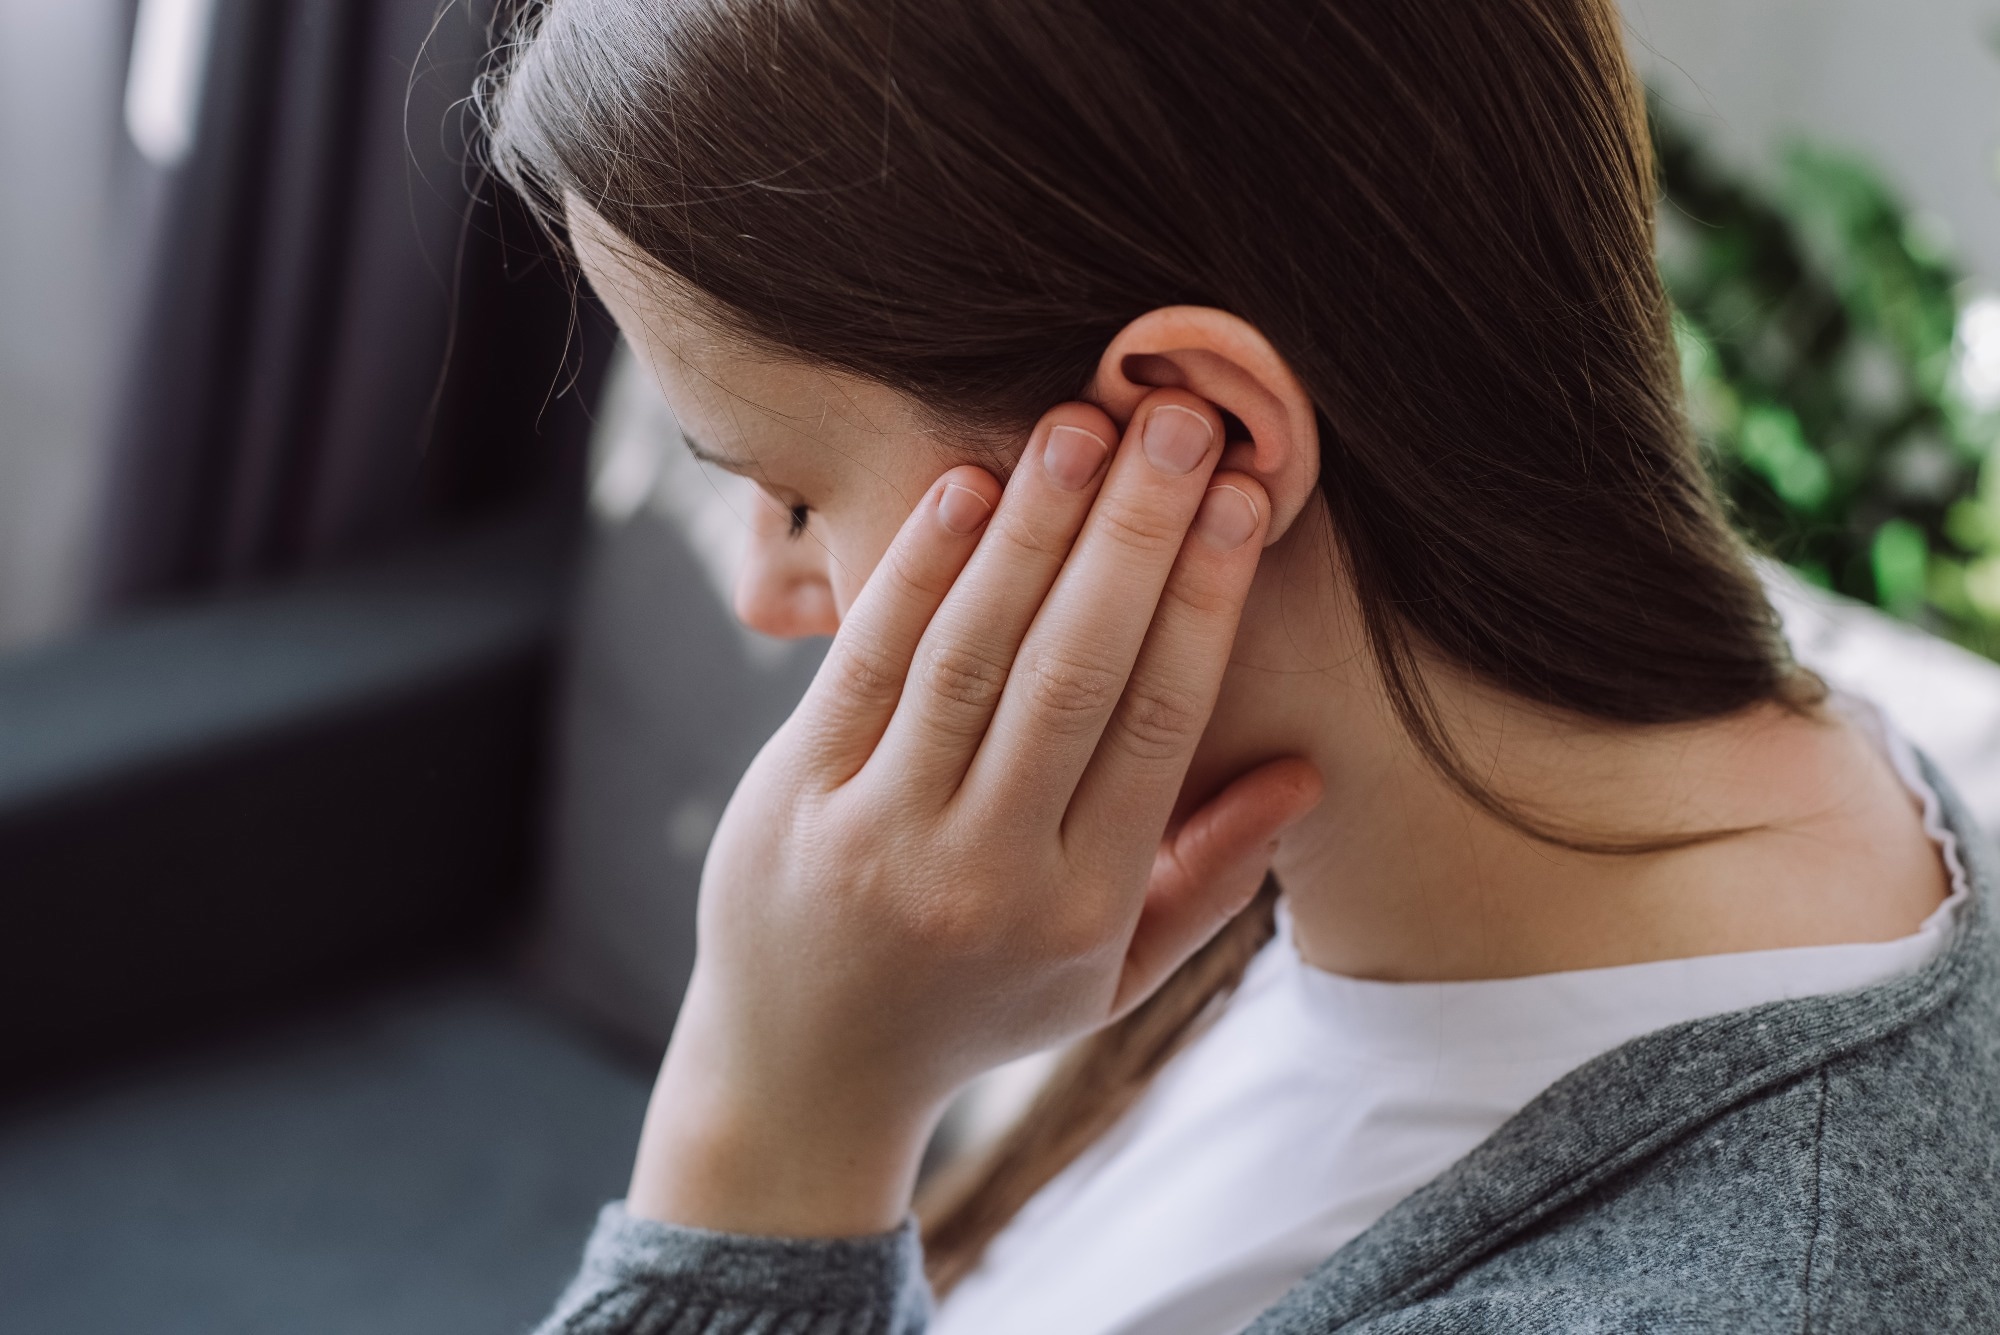 Study: Evidence of cochlear neural degeneration in normal-hearing subjects with tinnitus. Image Credit: Yurii_Yarema/Shutterstock.com